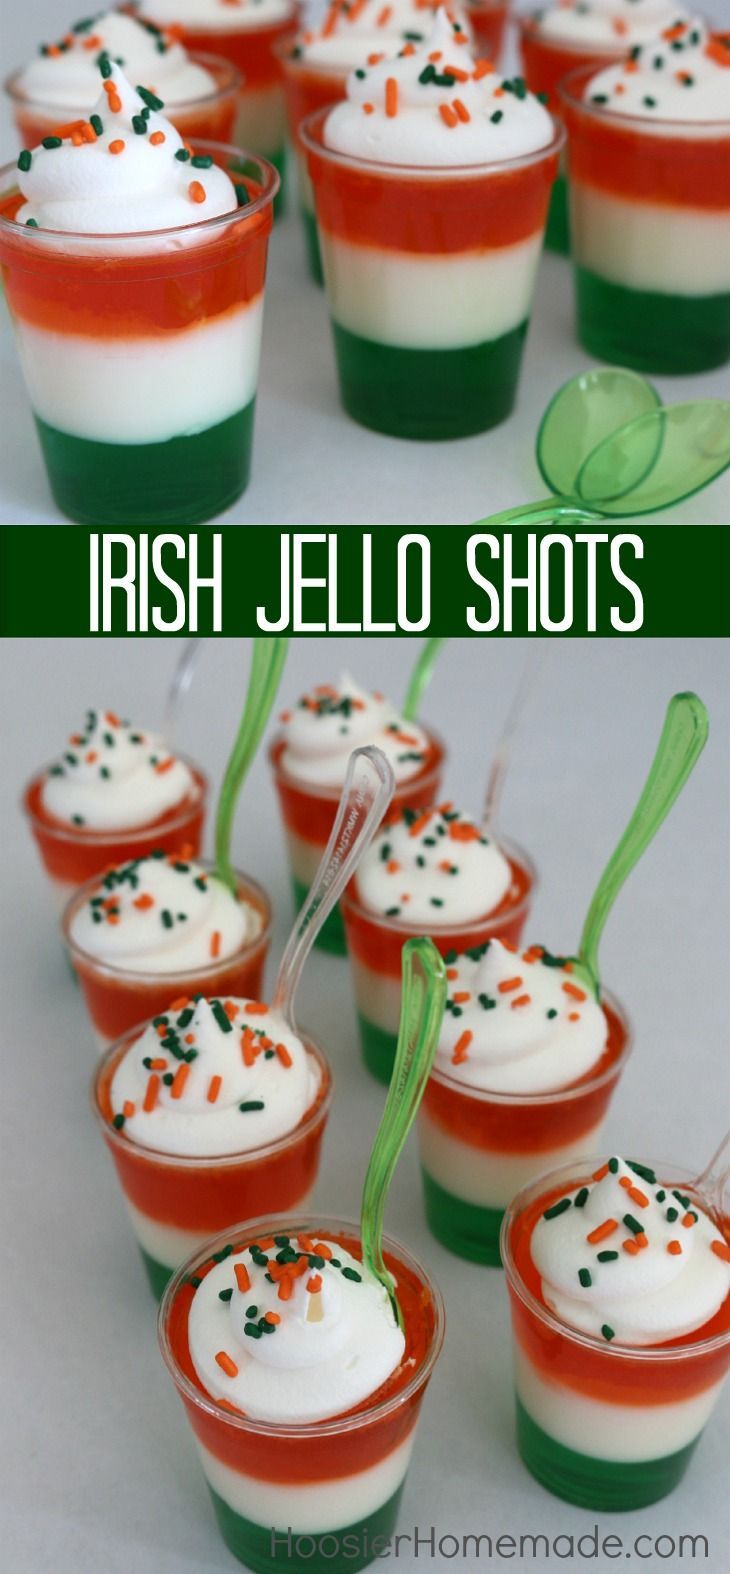 Irish Jello Shots – this fun St. Patrick’s Day Treat can be made with or without alcohol. A little goes a long way in making these